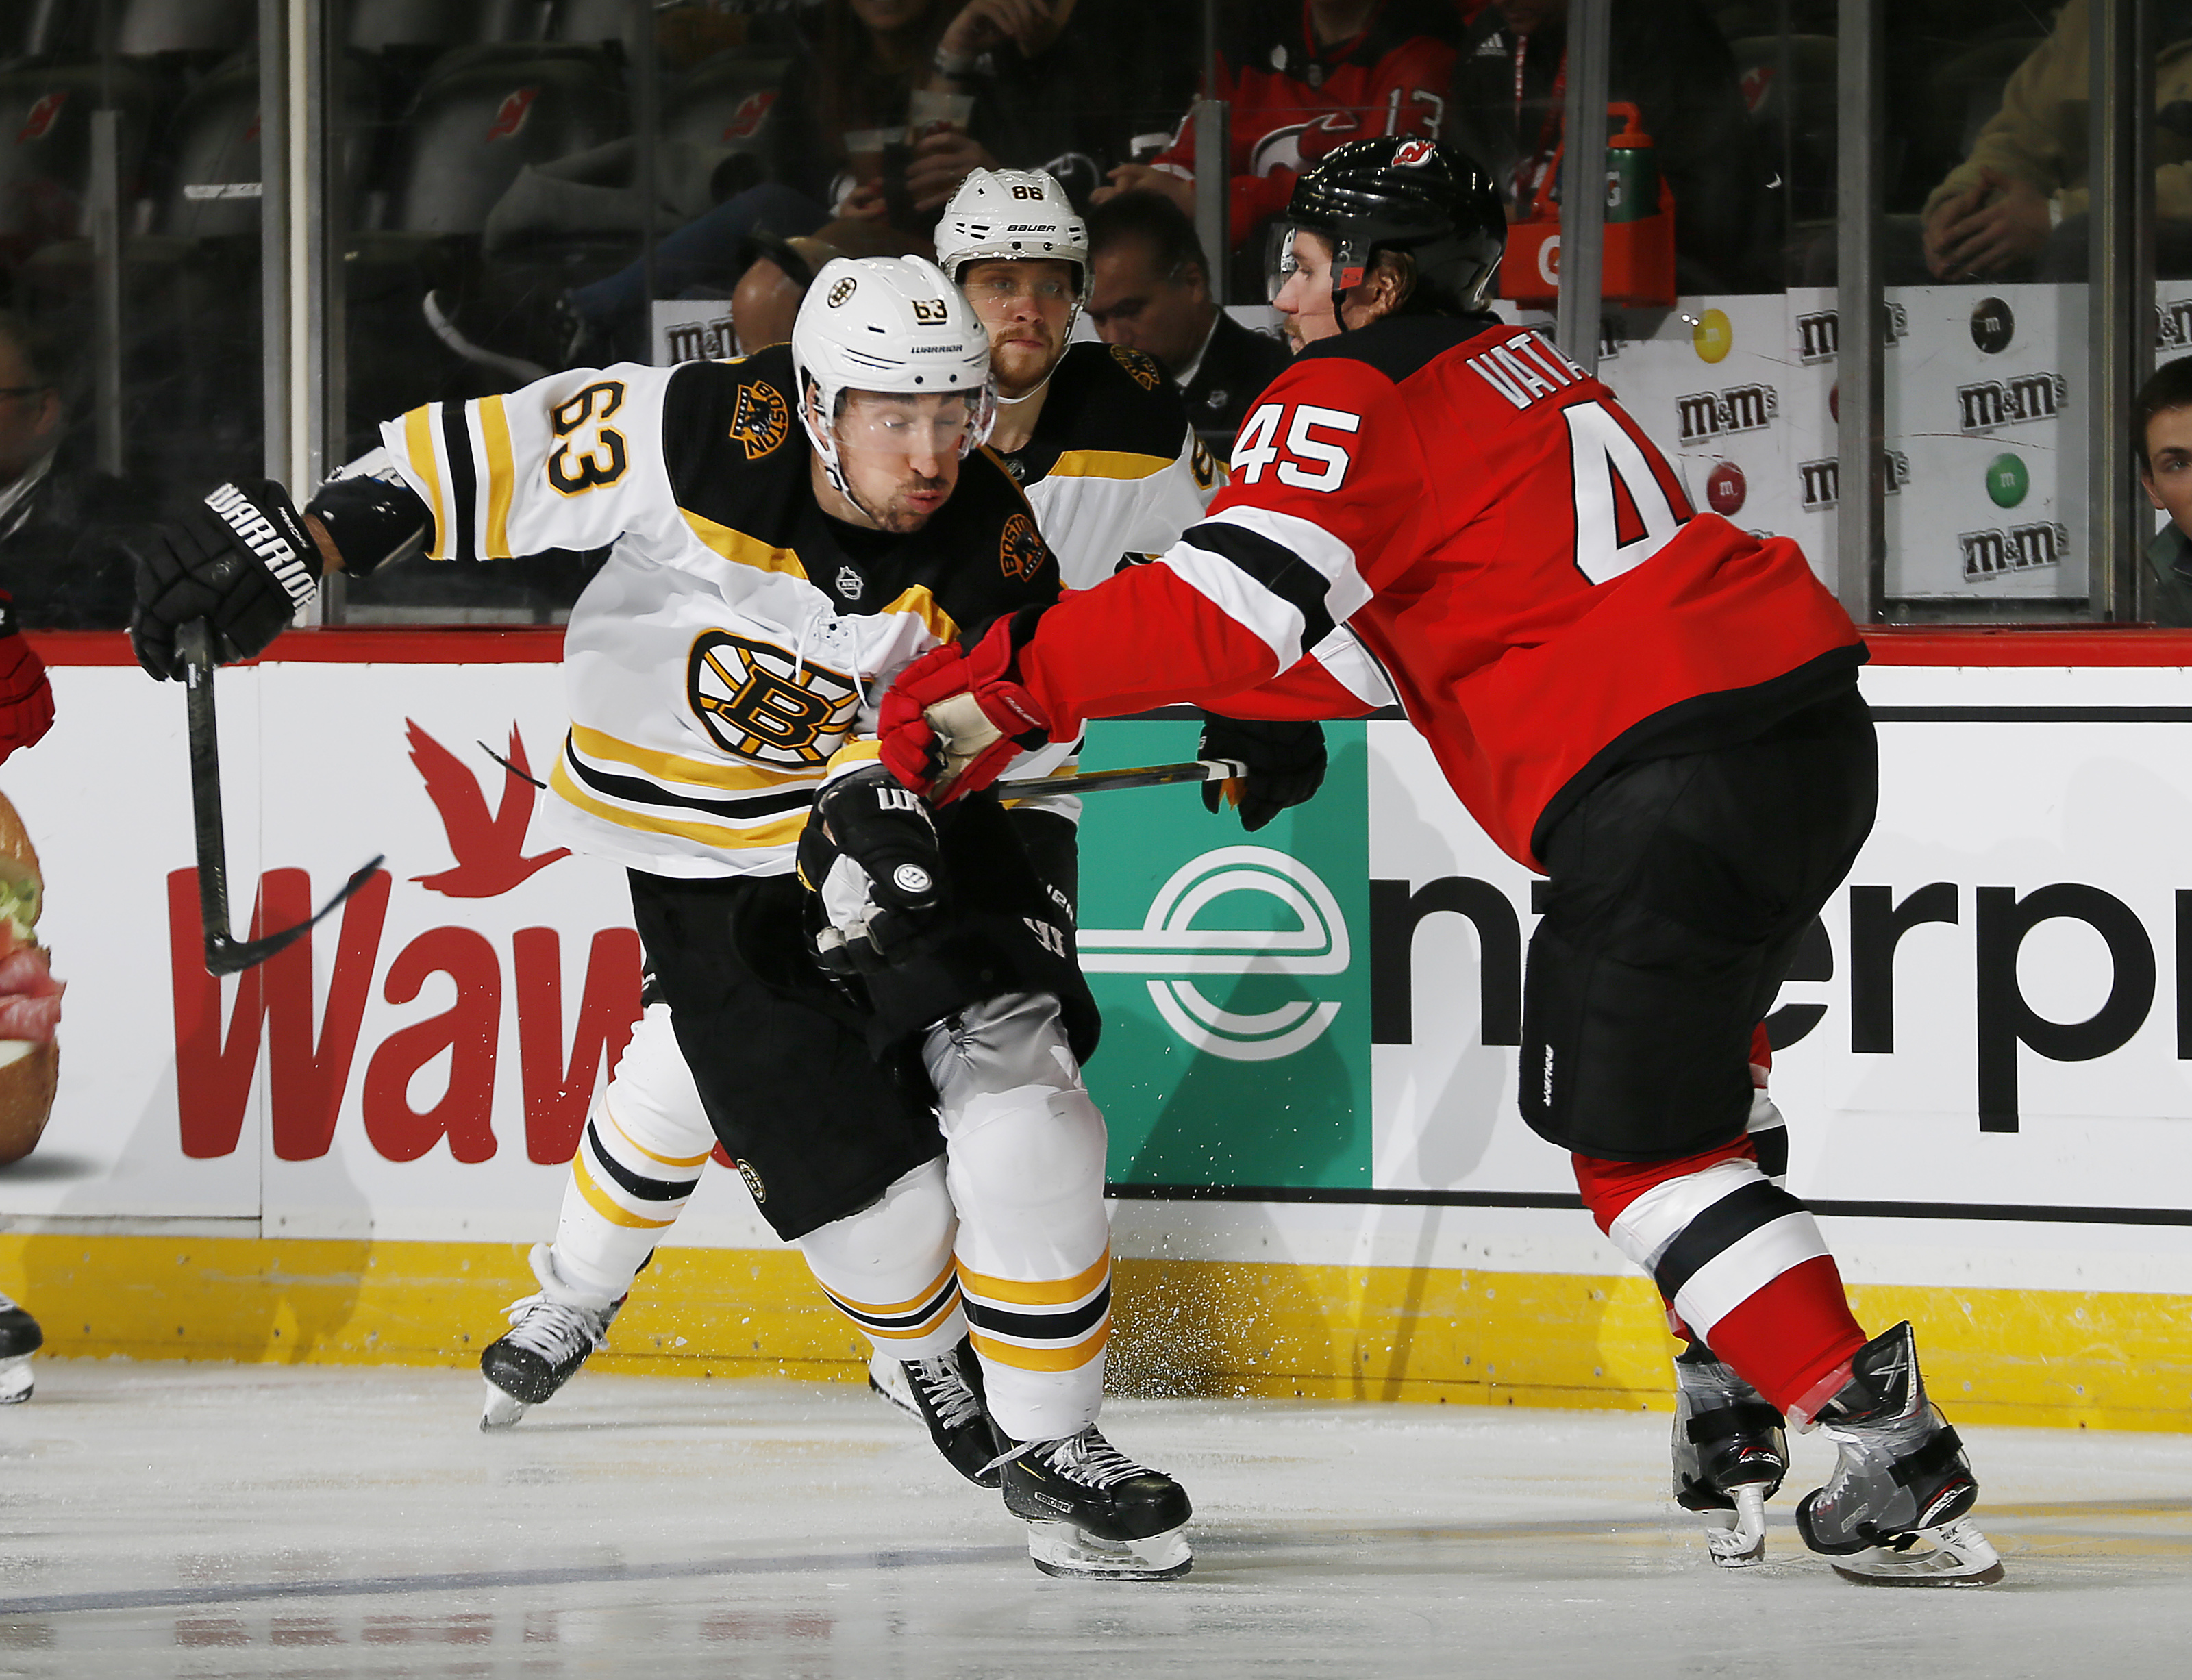 Game Preview #45: Devils vs the Pittsburgh Penguins - All About